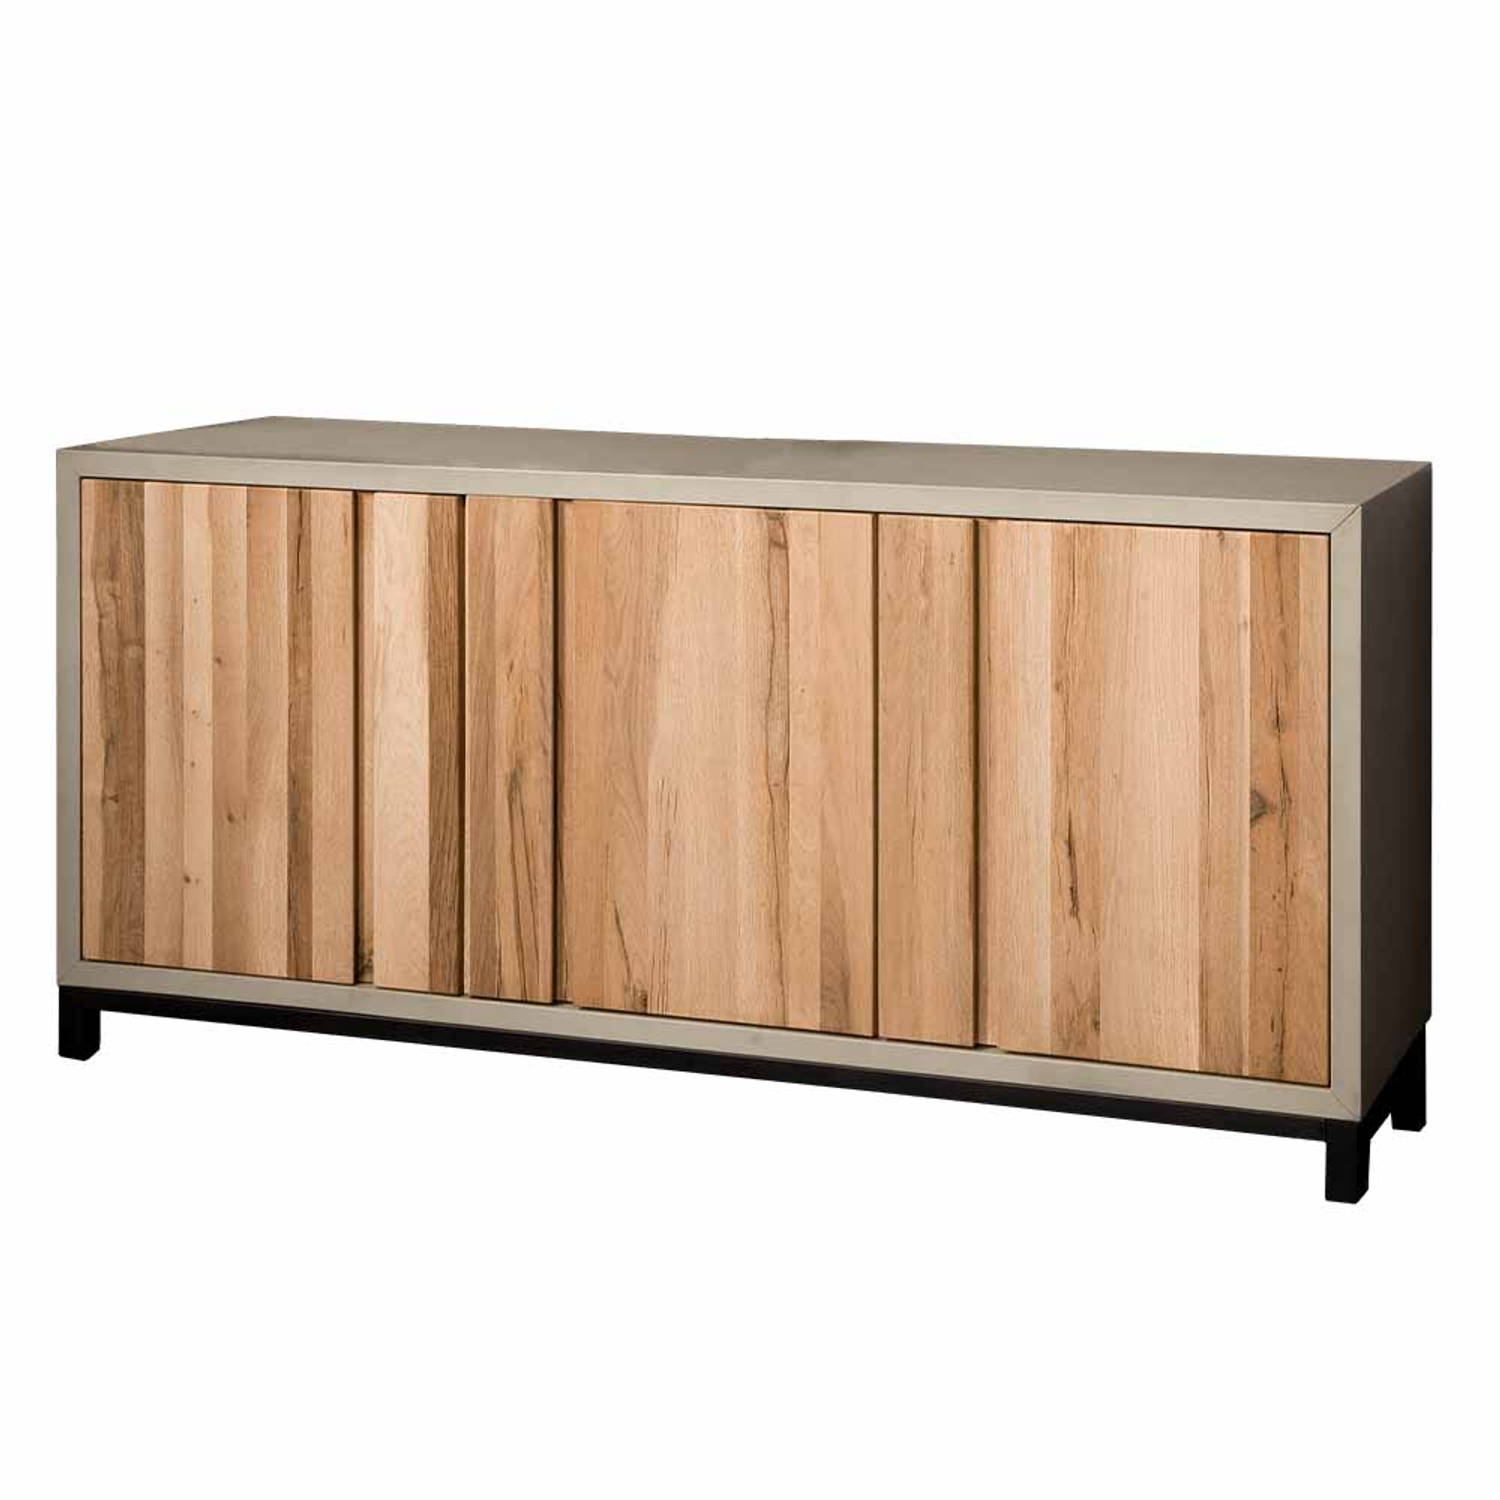 TOFF Max Sideboard 3 drs. - 180